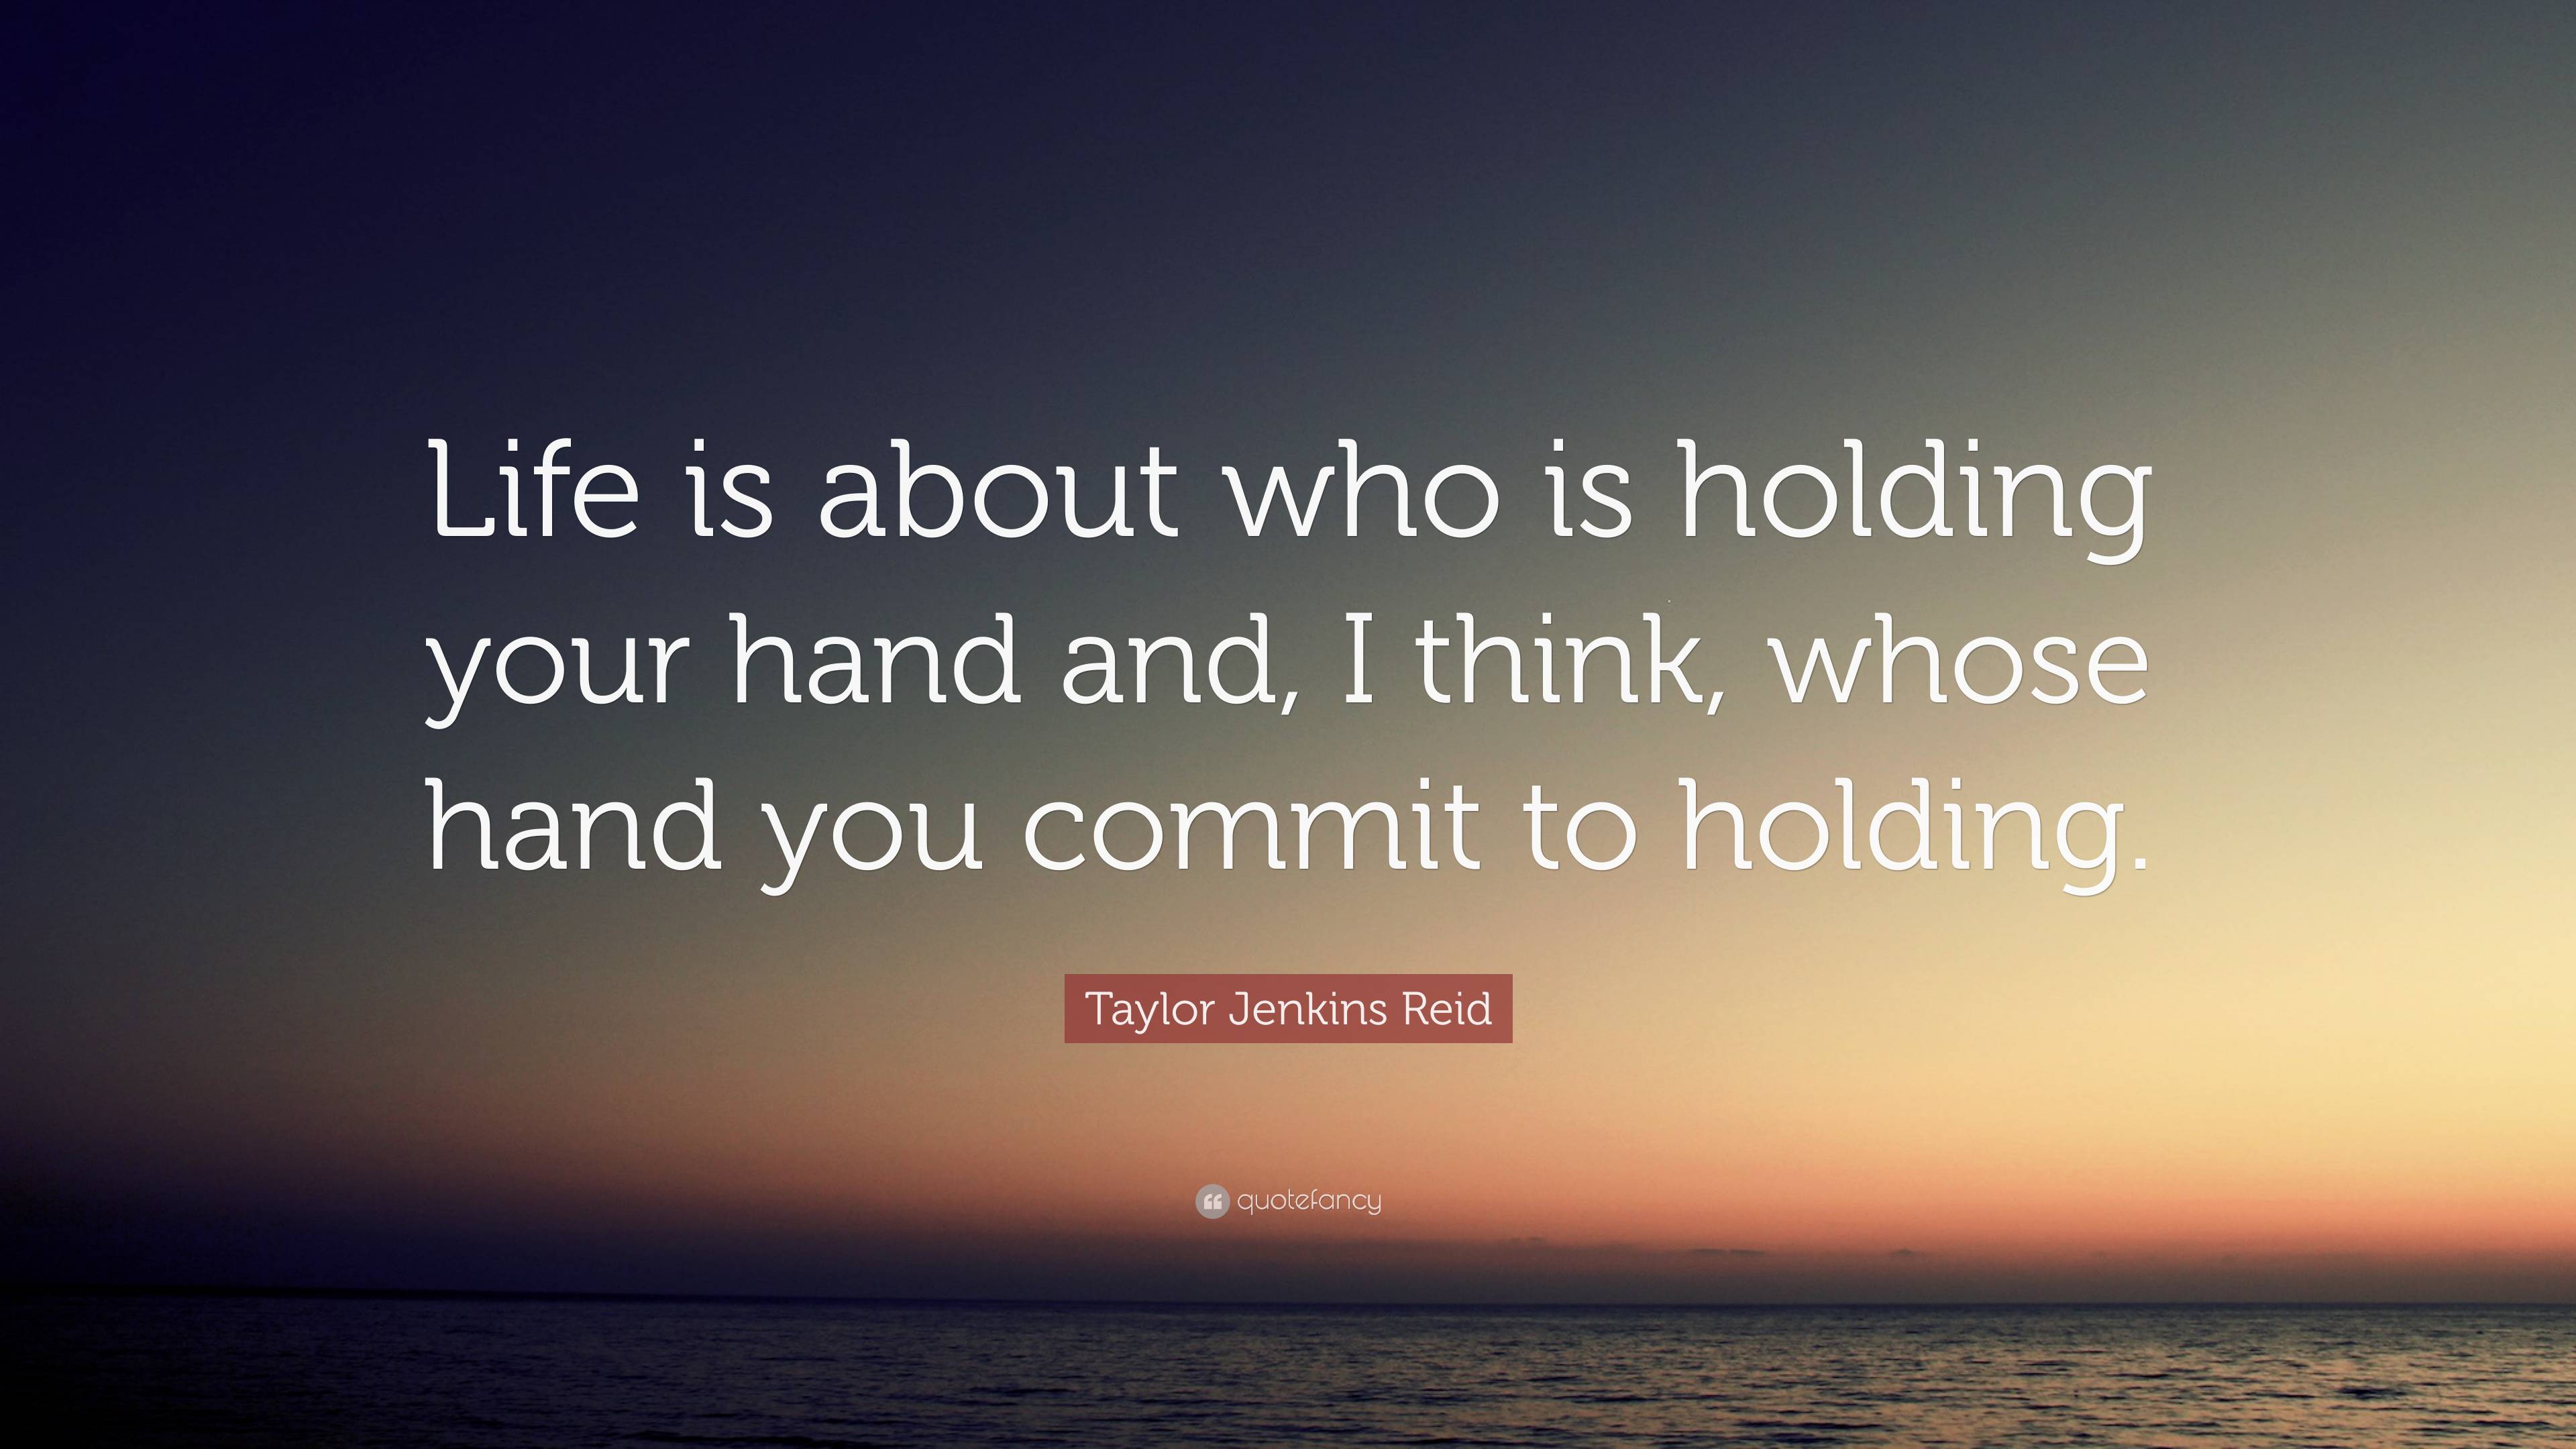 Taylor Jenkins Reid Quote: “Life is about who is holding your hand and ...